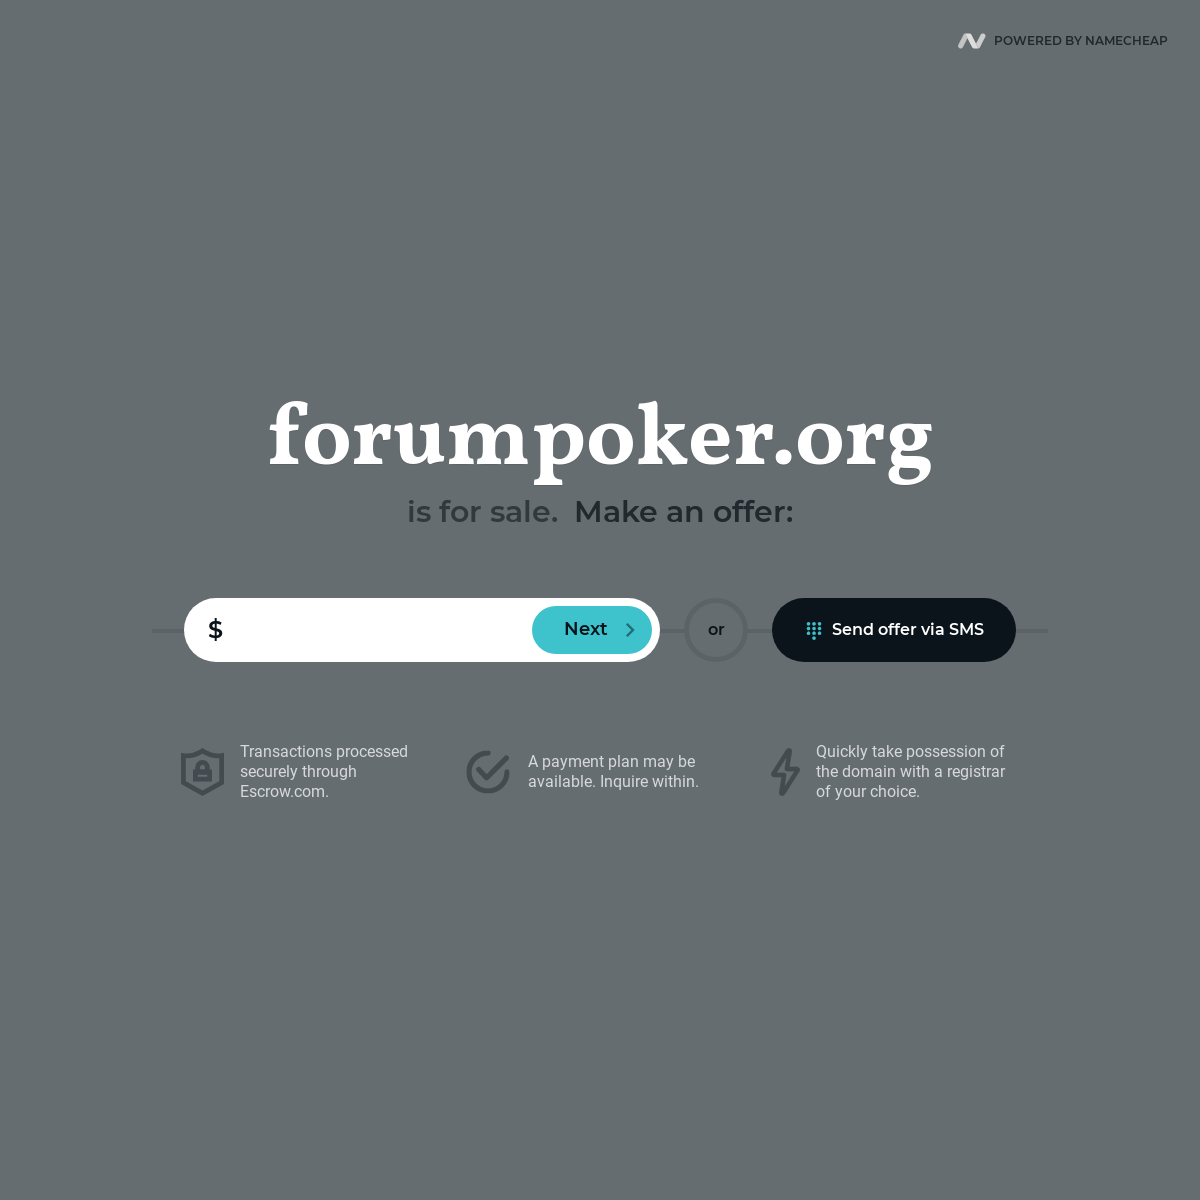 A complete backup of forumpoker.org